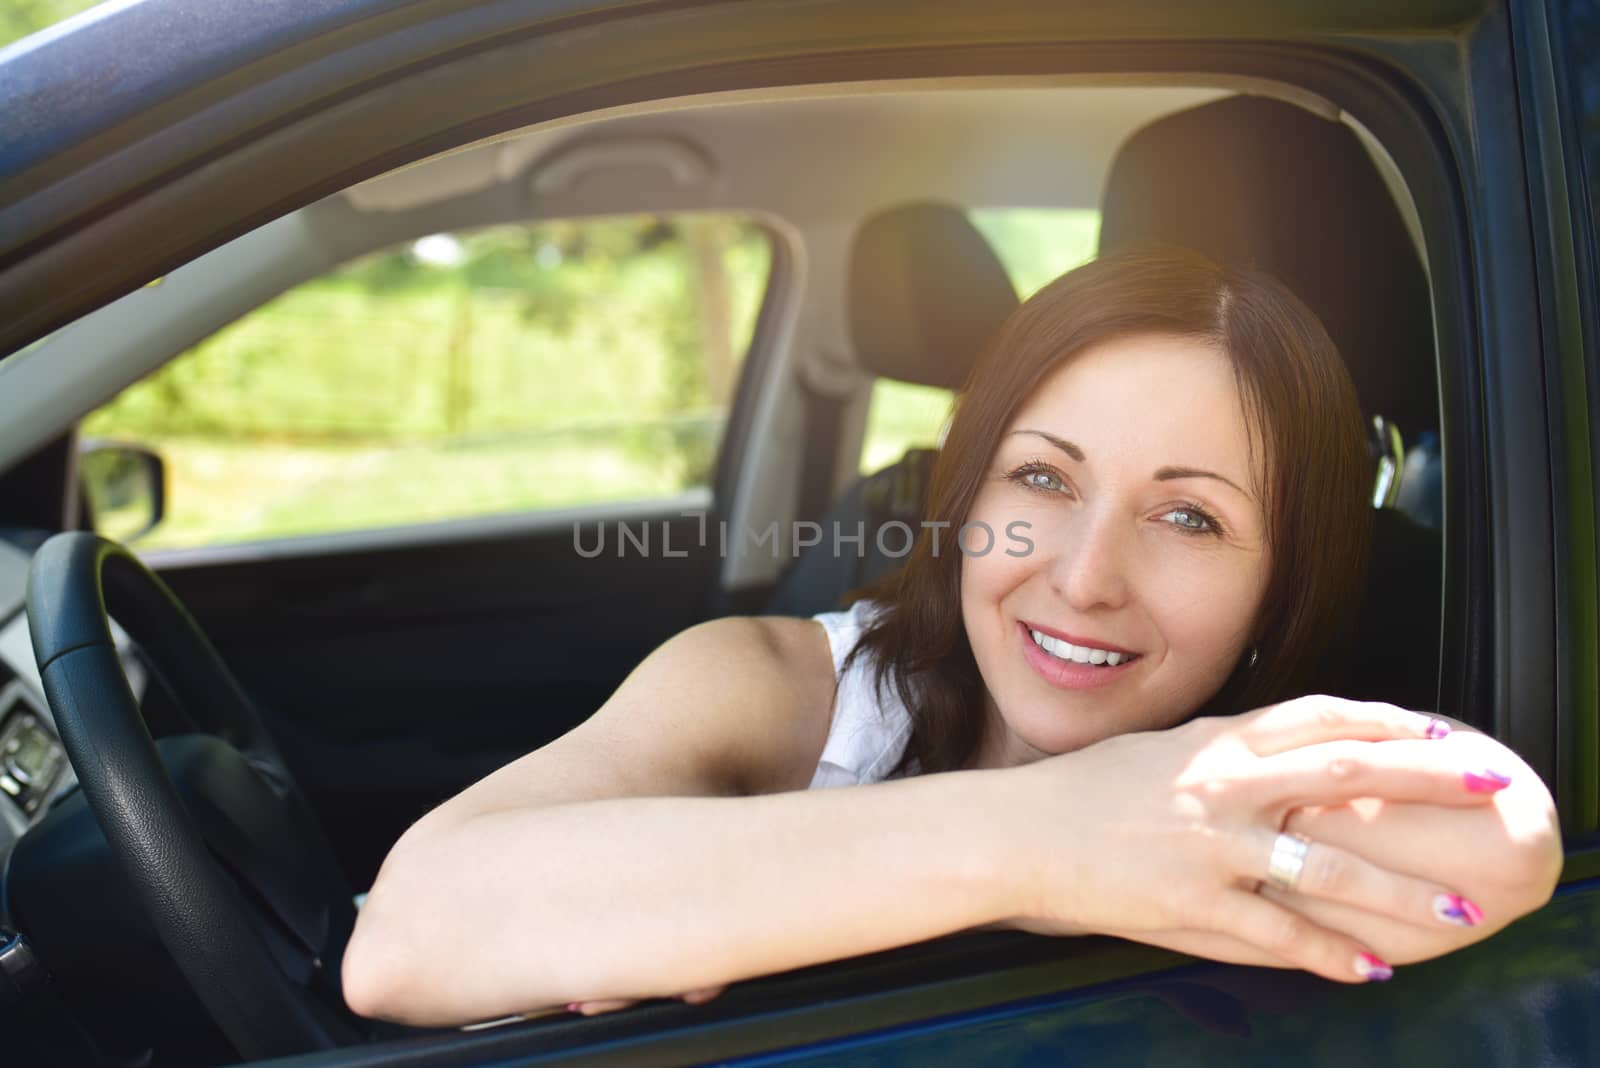 Smiling female driver looking out the car. a portrait of a smiling woman sitting in the car, looking at the camera.